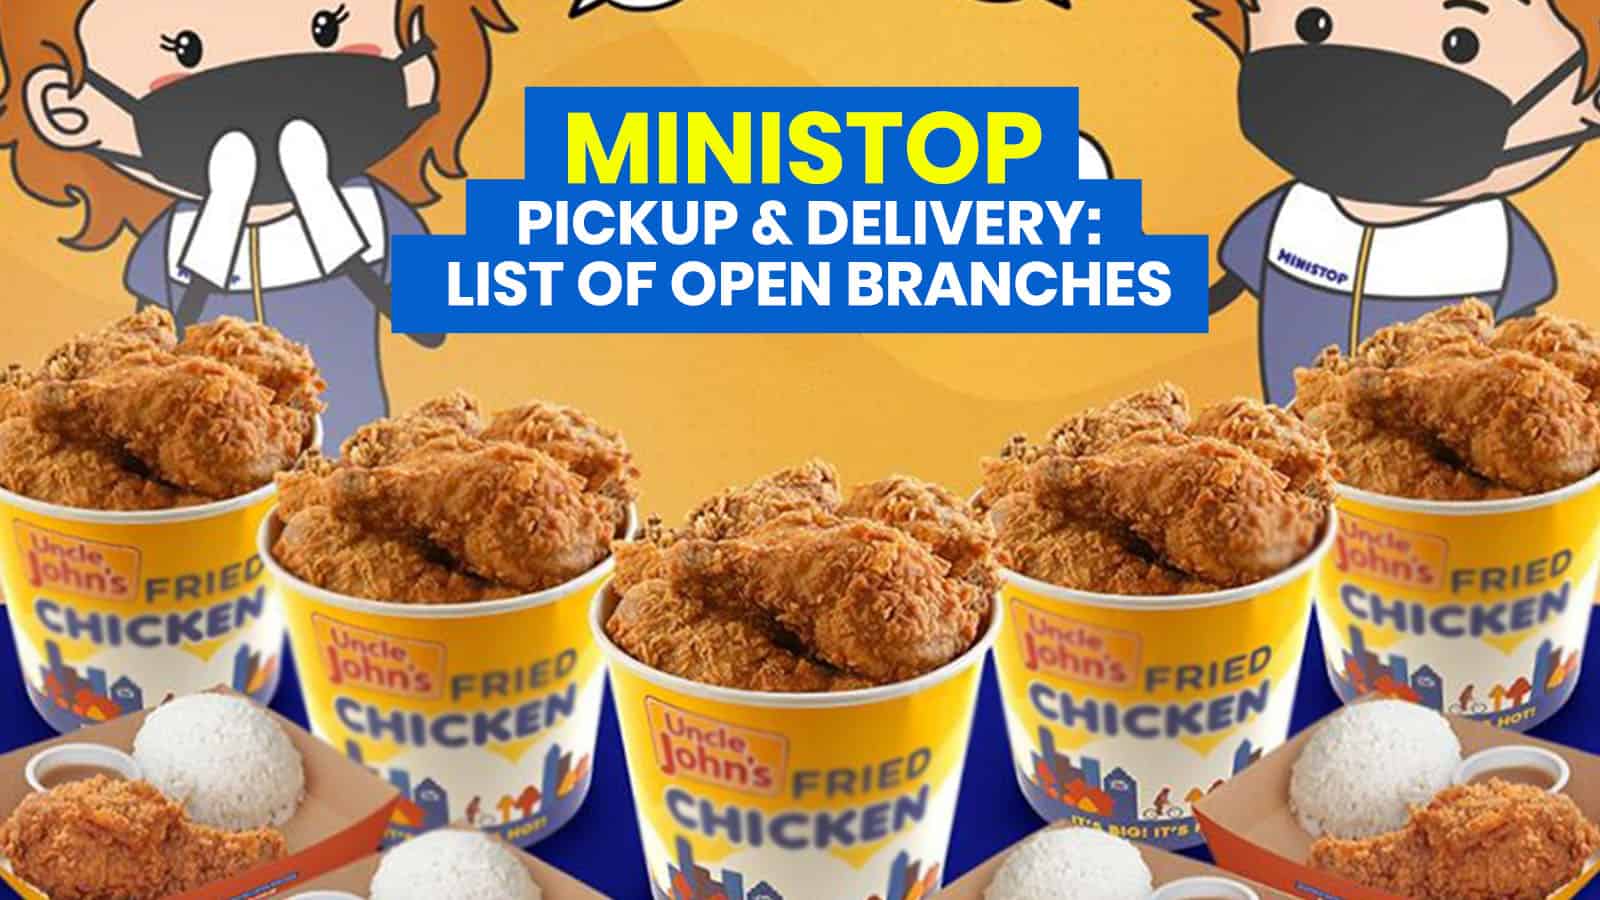 MINISTOP DELIVERY & PICKUP: List of Open Branches + Frozen Packs Menu